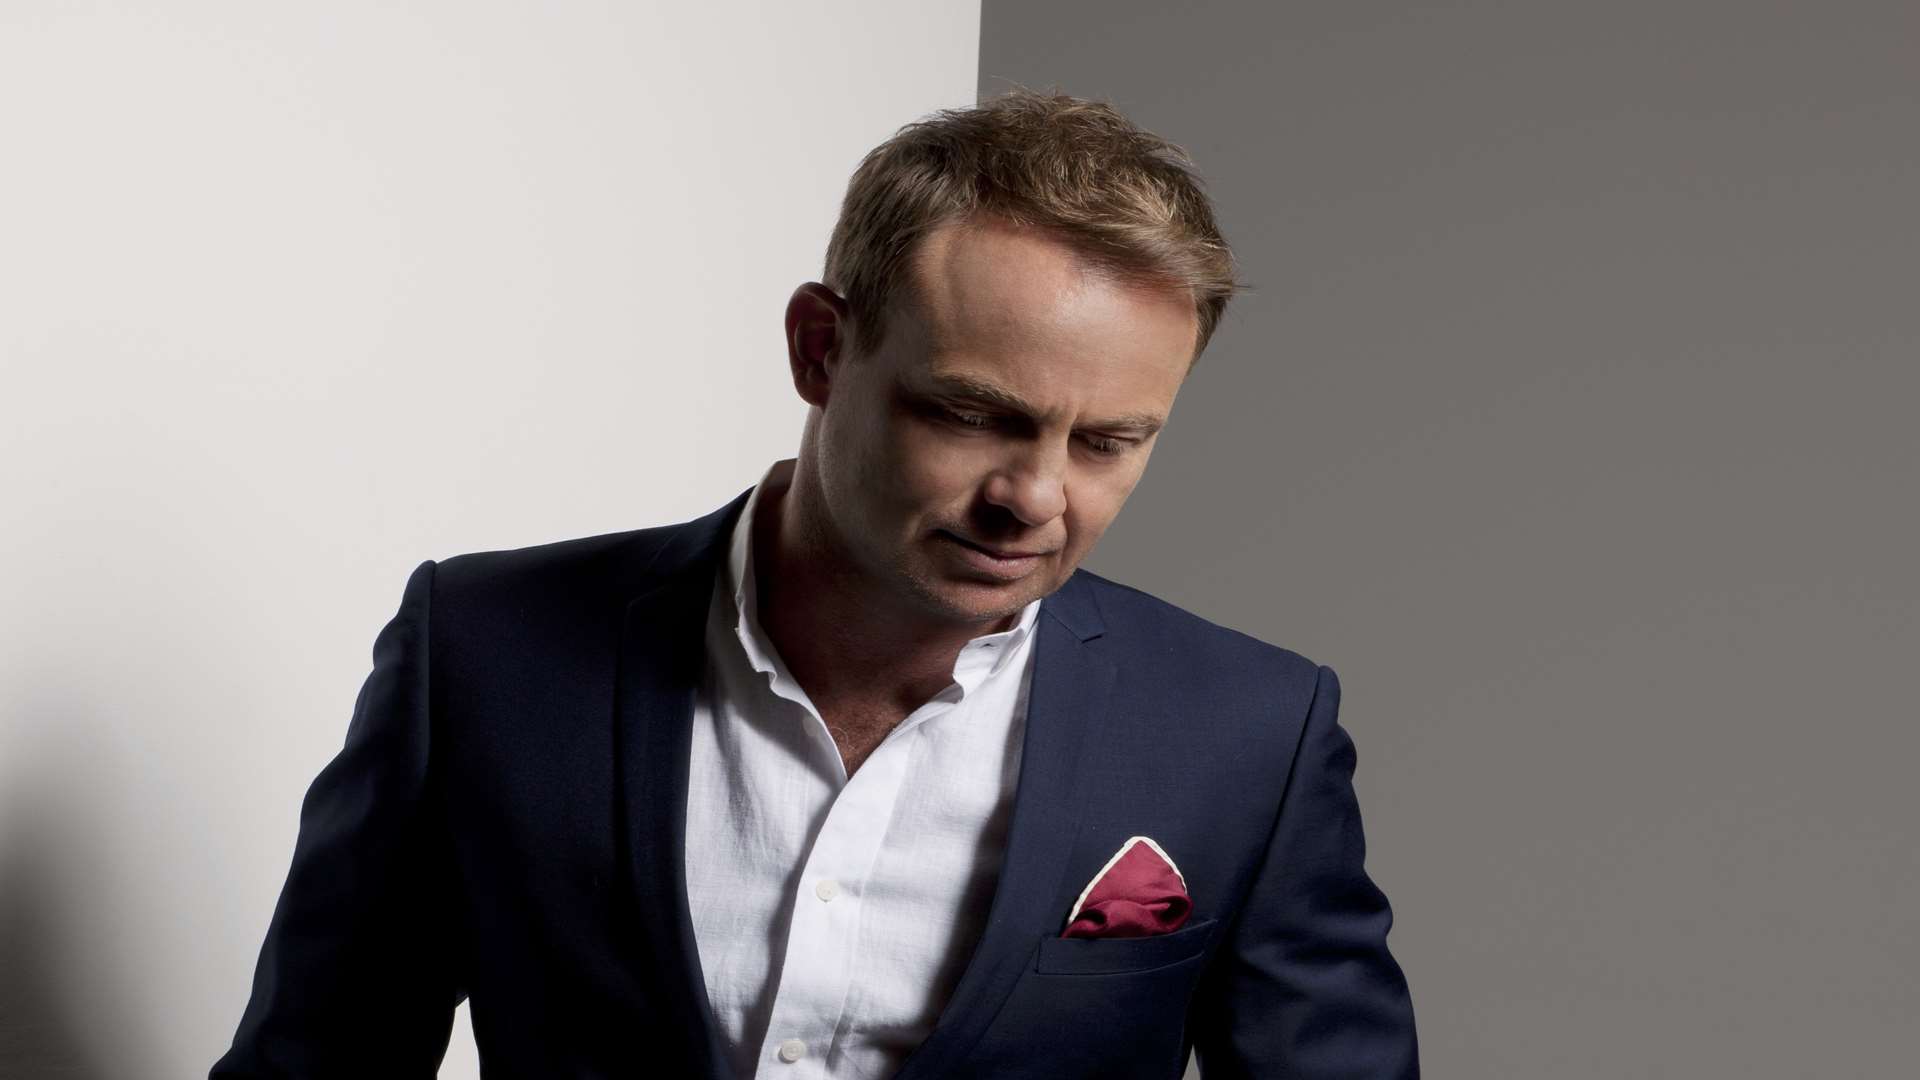 Jason Donovan is coming to Margate